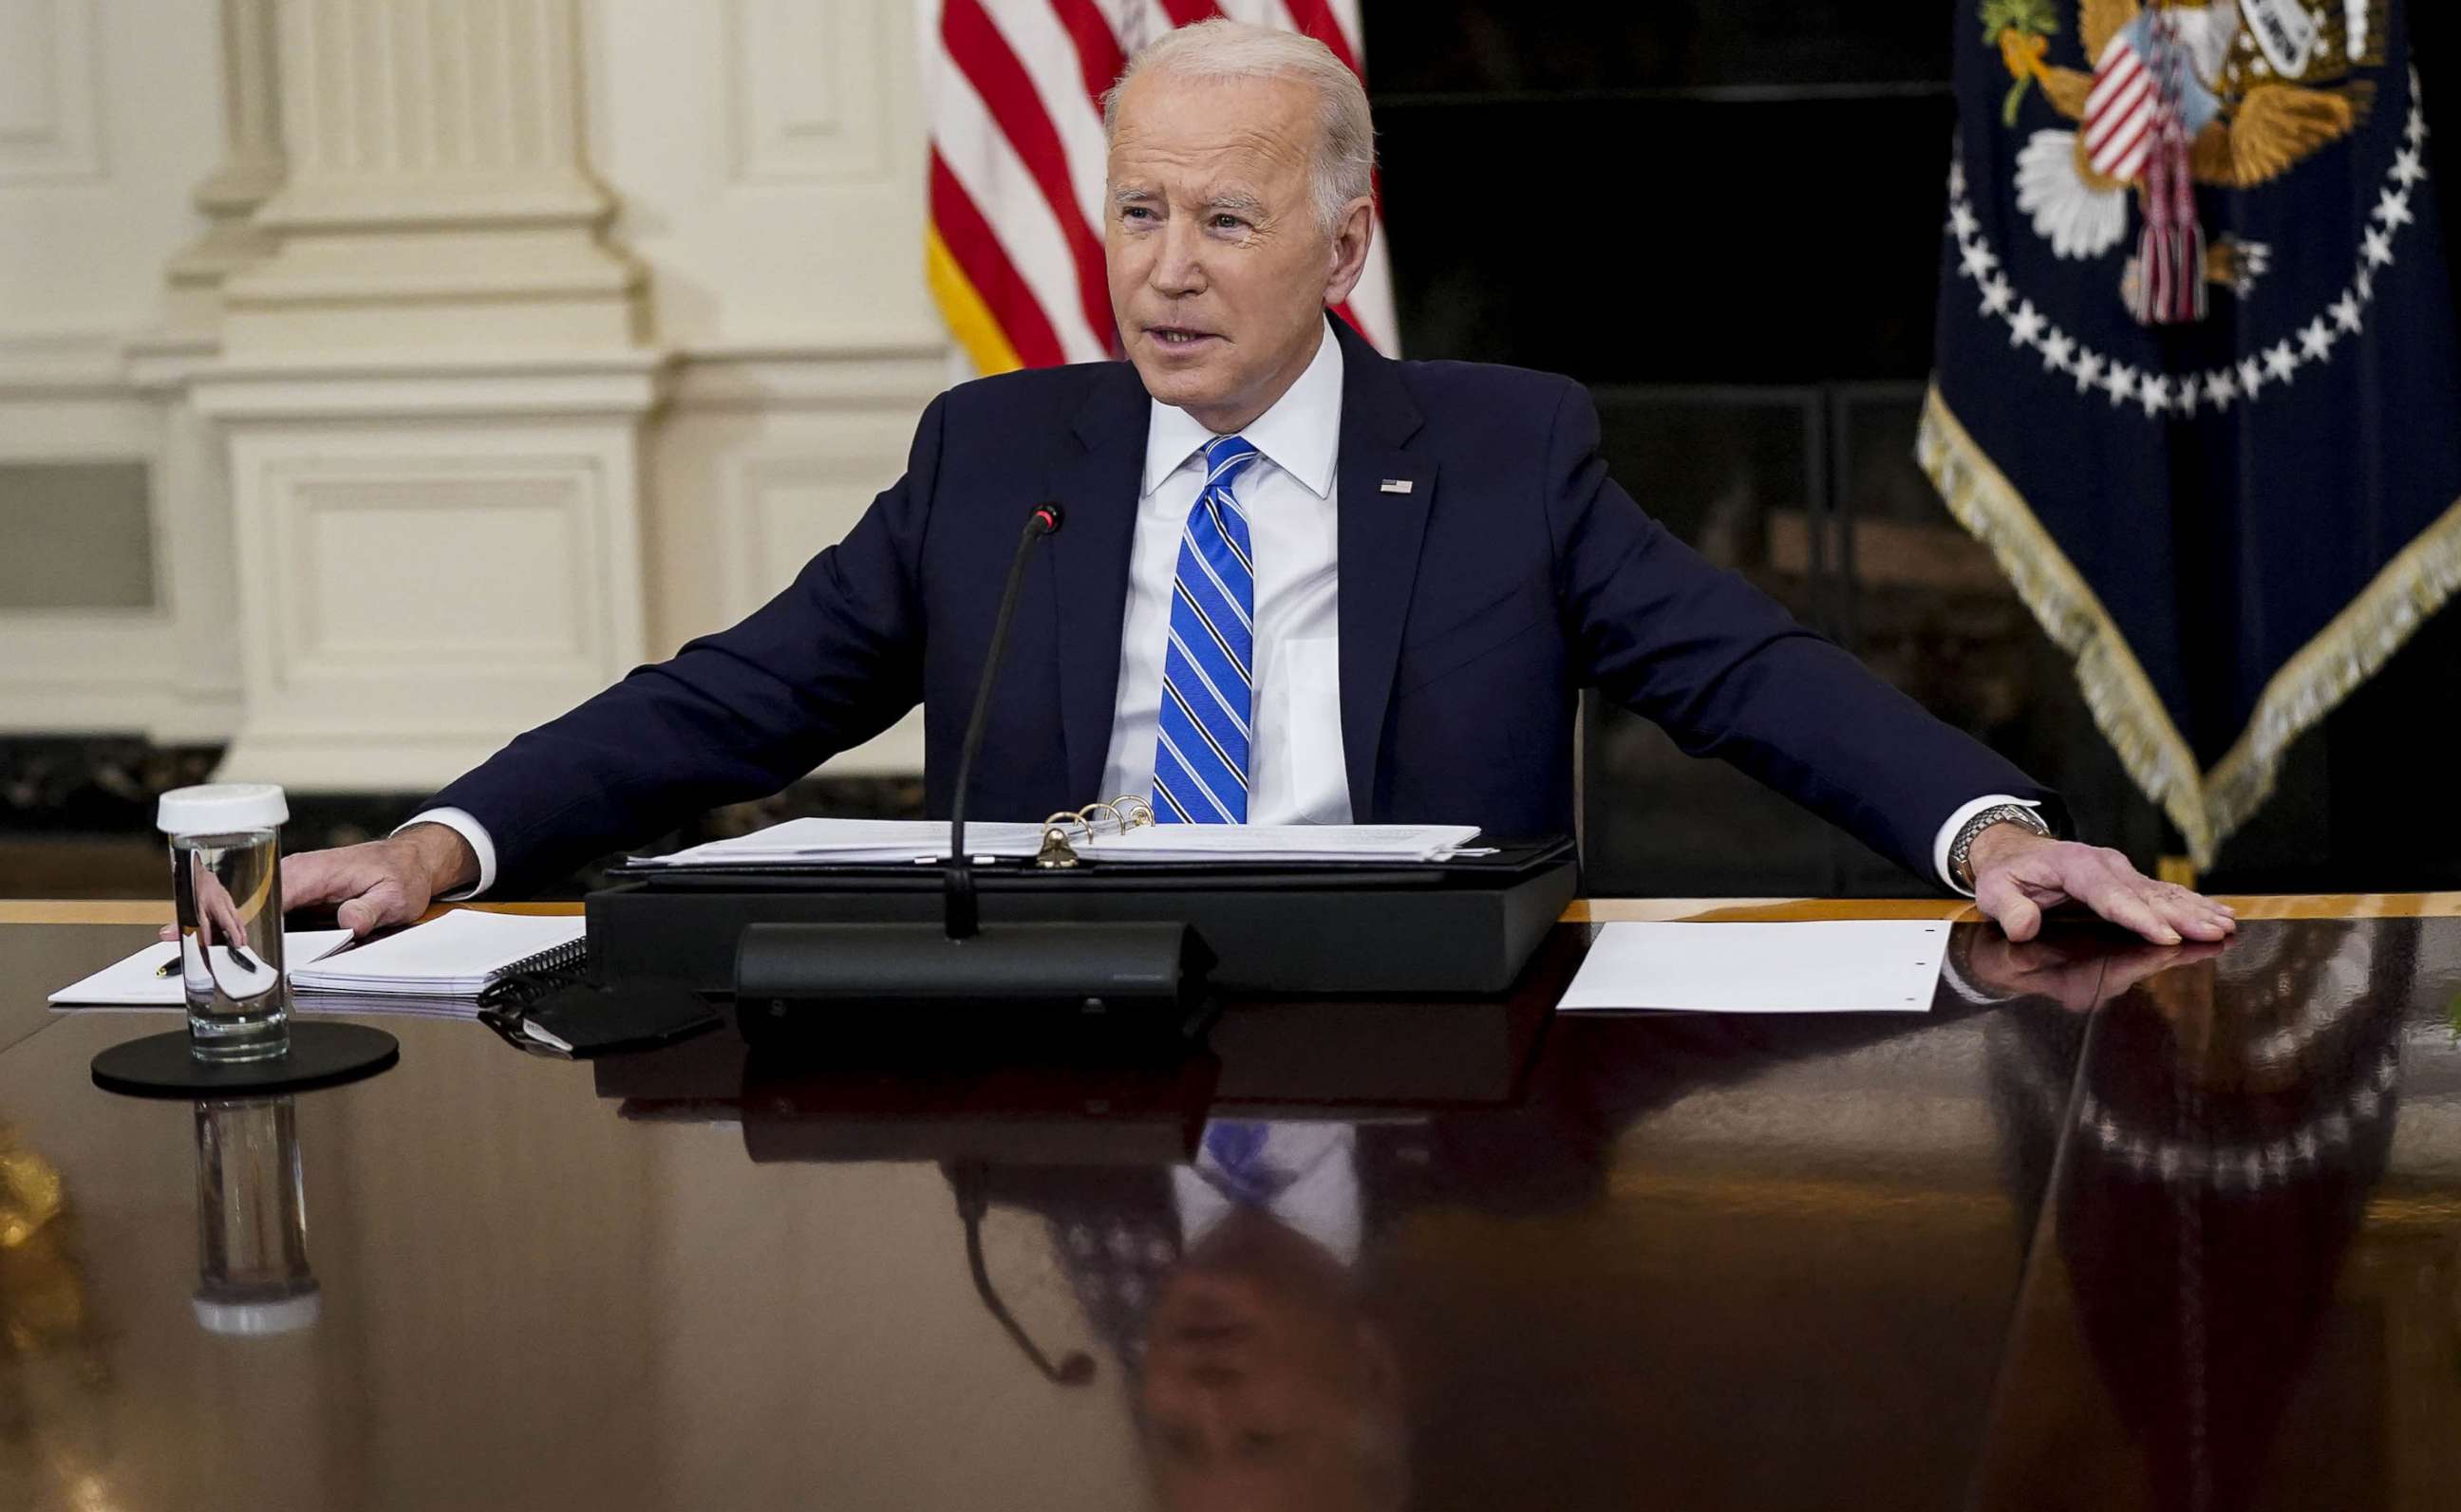 PHOTO: President Joe Biden speaks during a meeting in the State Dining Room of the White House in Washington, Jan. 26, 2022.